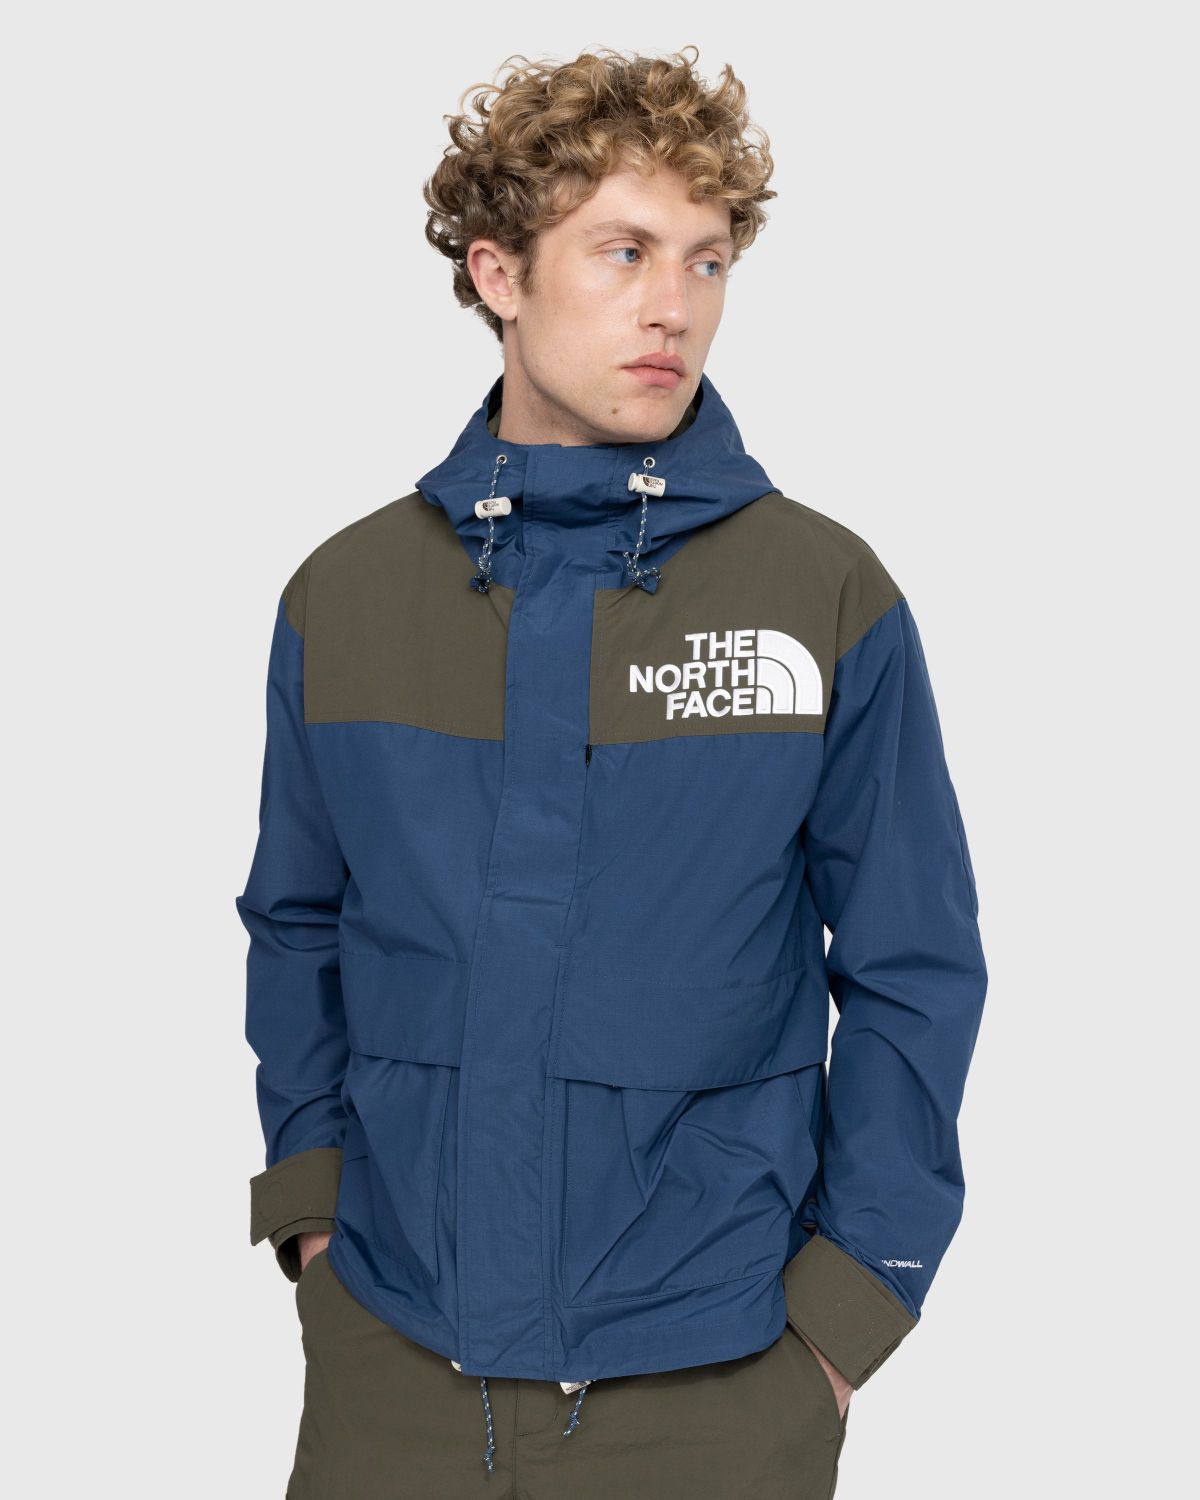 The North Face – ‘86 Low-Fi Hi-Tek Mountain Jacket Shady Blue/New Taupe Green - Windbreakers - Blue - Image 5